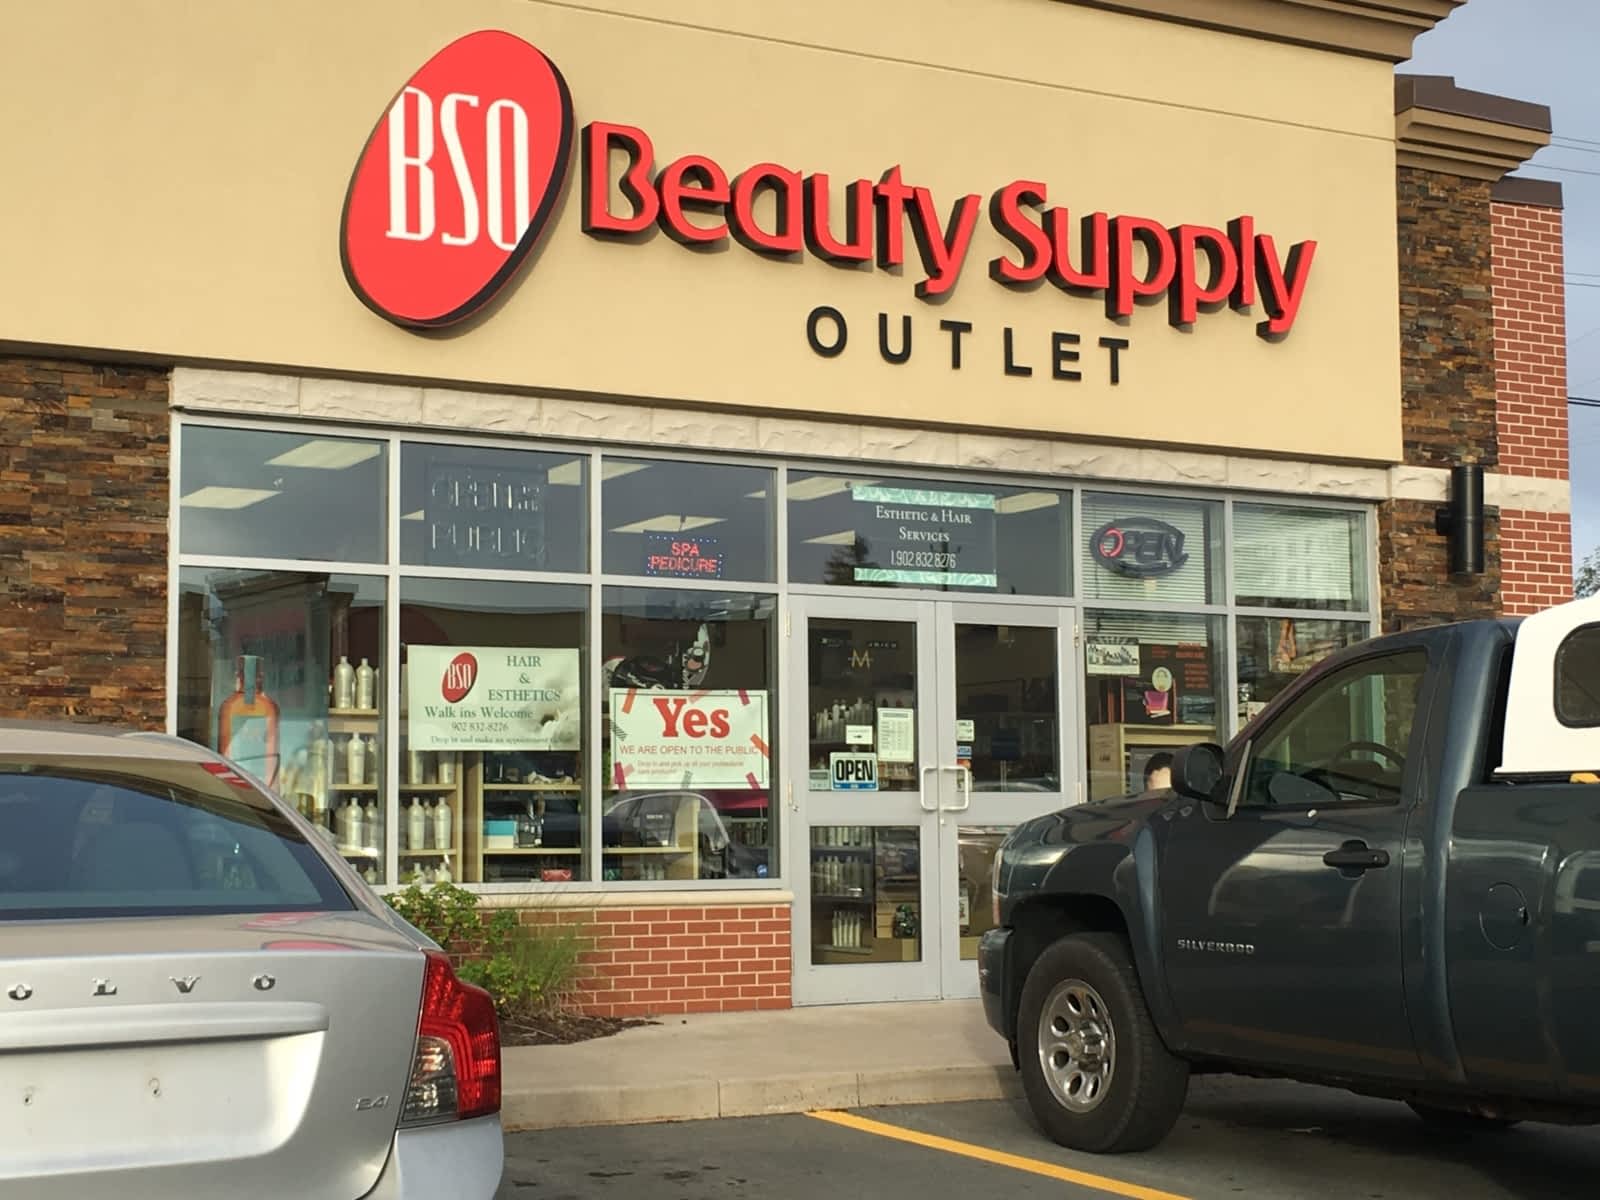 Beauty Supply Outlet - 81 Peakview Way, Halifax, NS